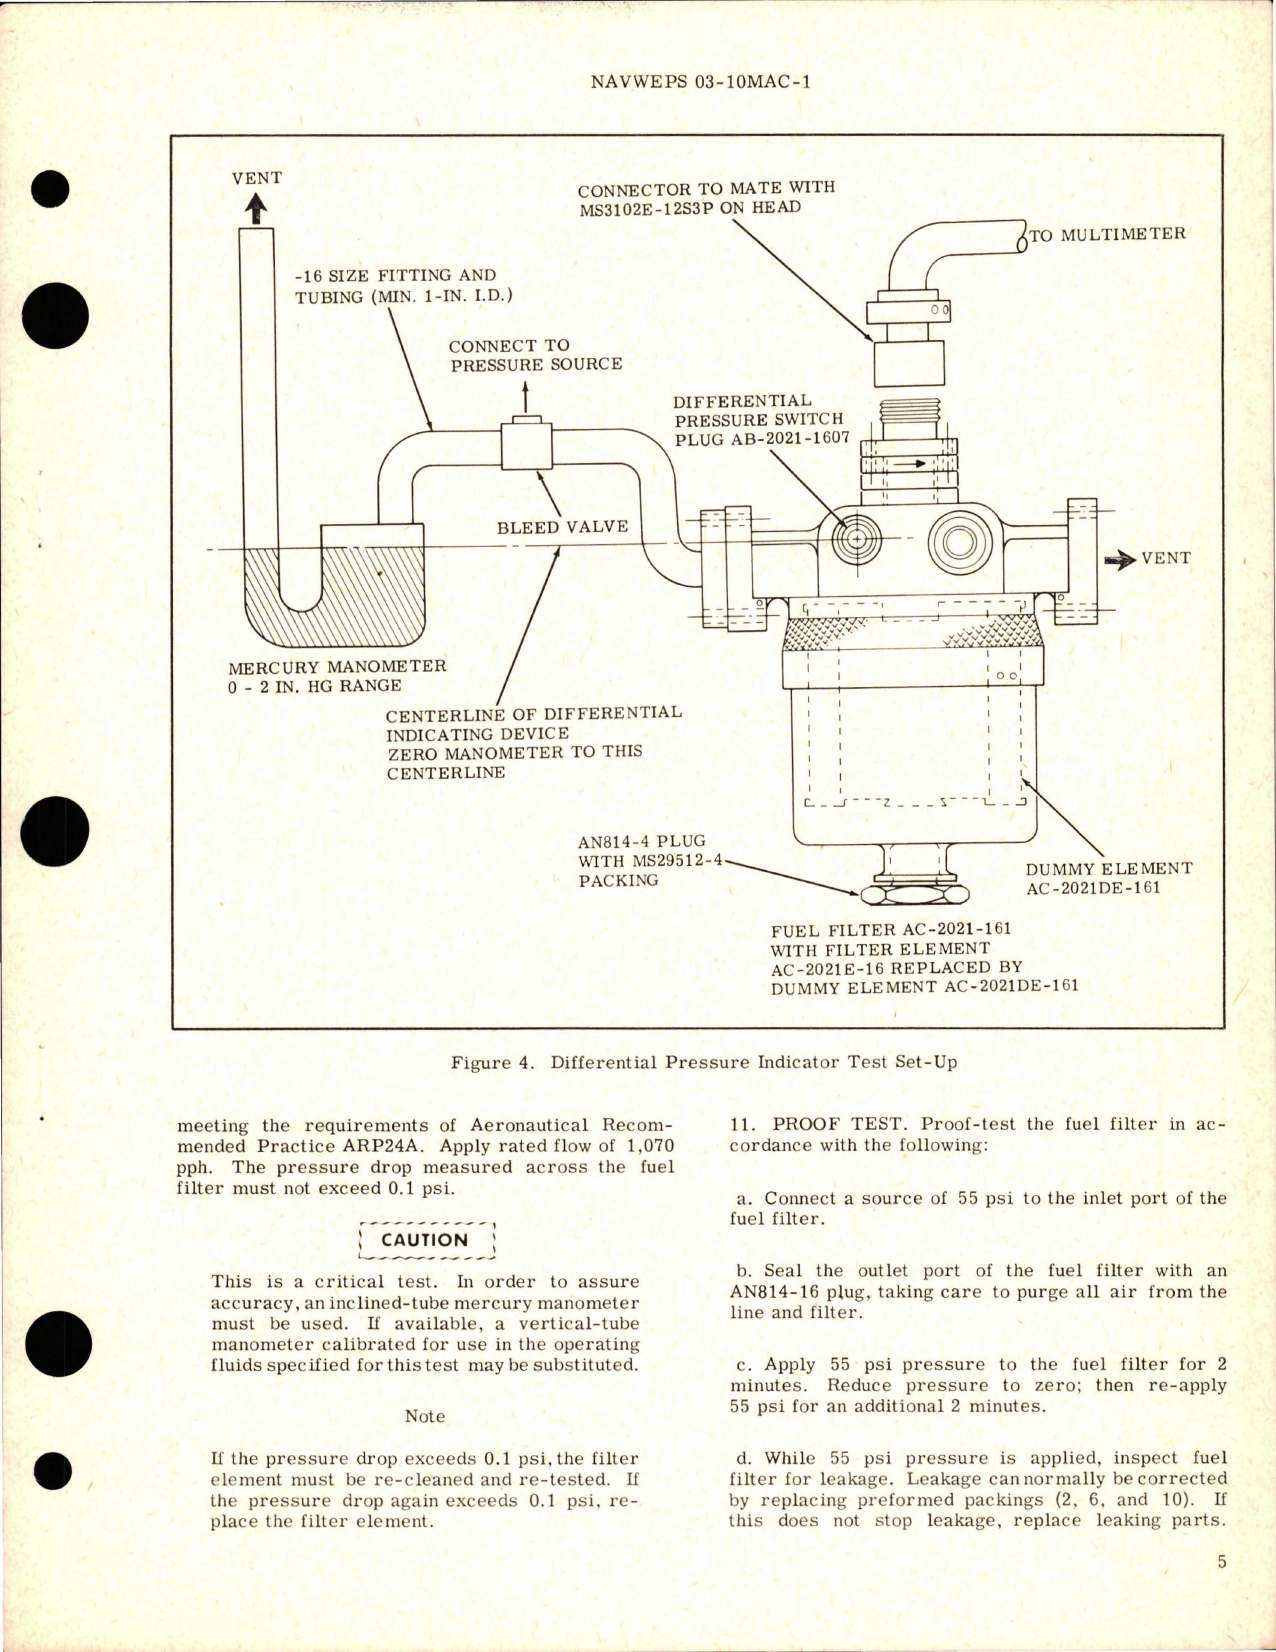 Sample page 5 from AirCorps Library document: Overhaul Instructions with Parts Breakdown for Fuel Filter - Part AC-2021-161